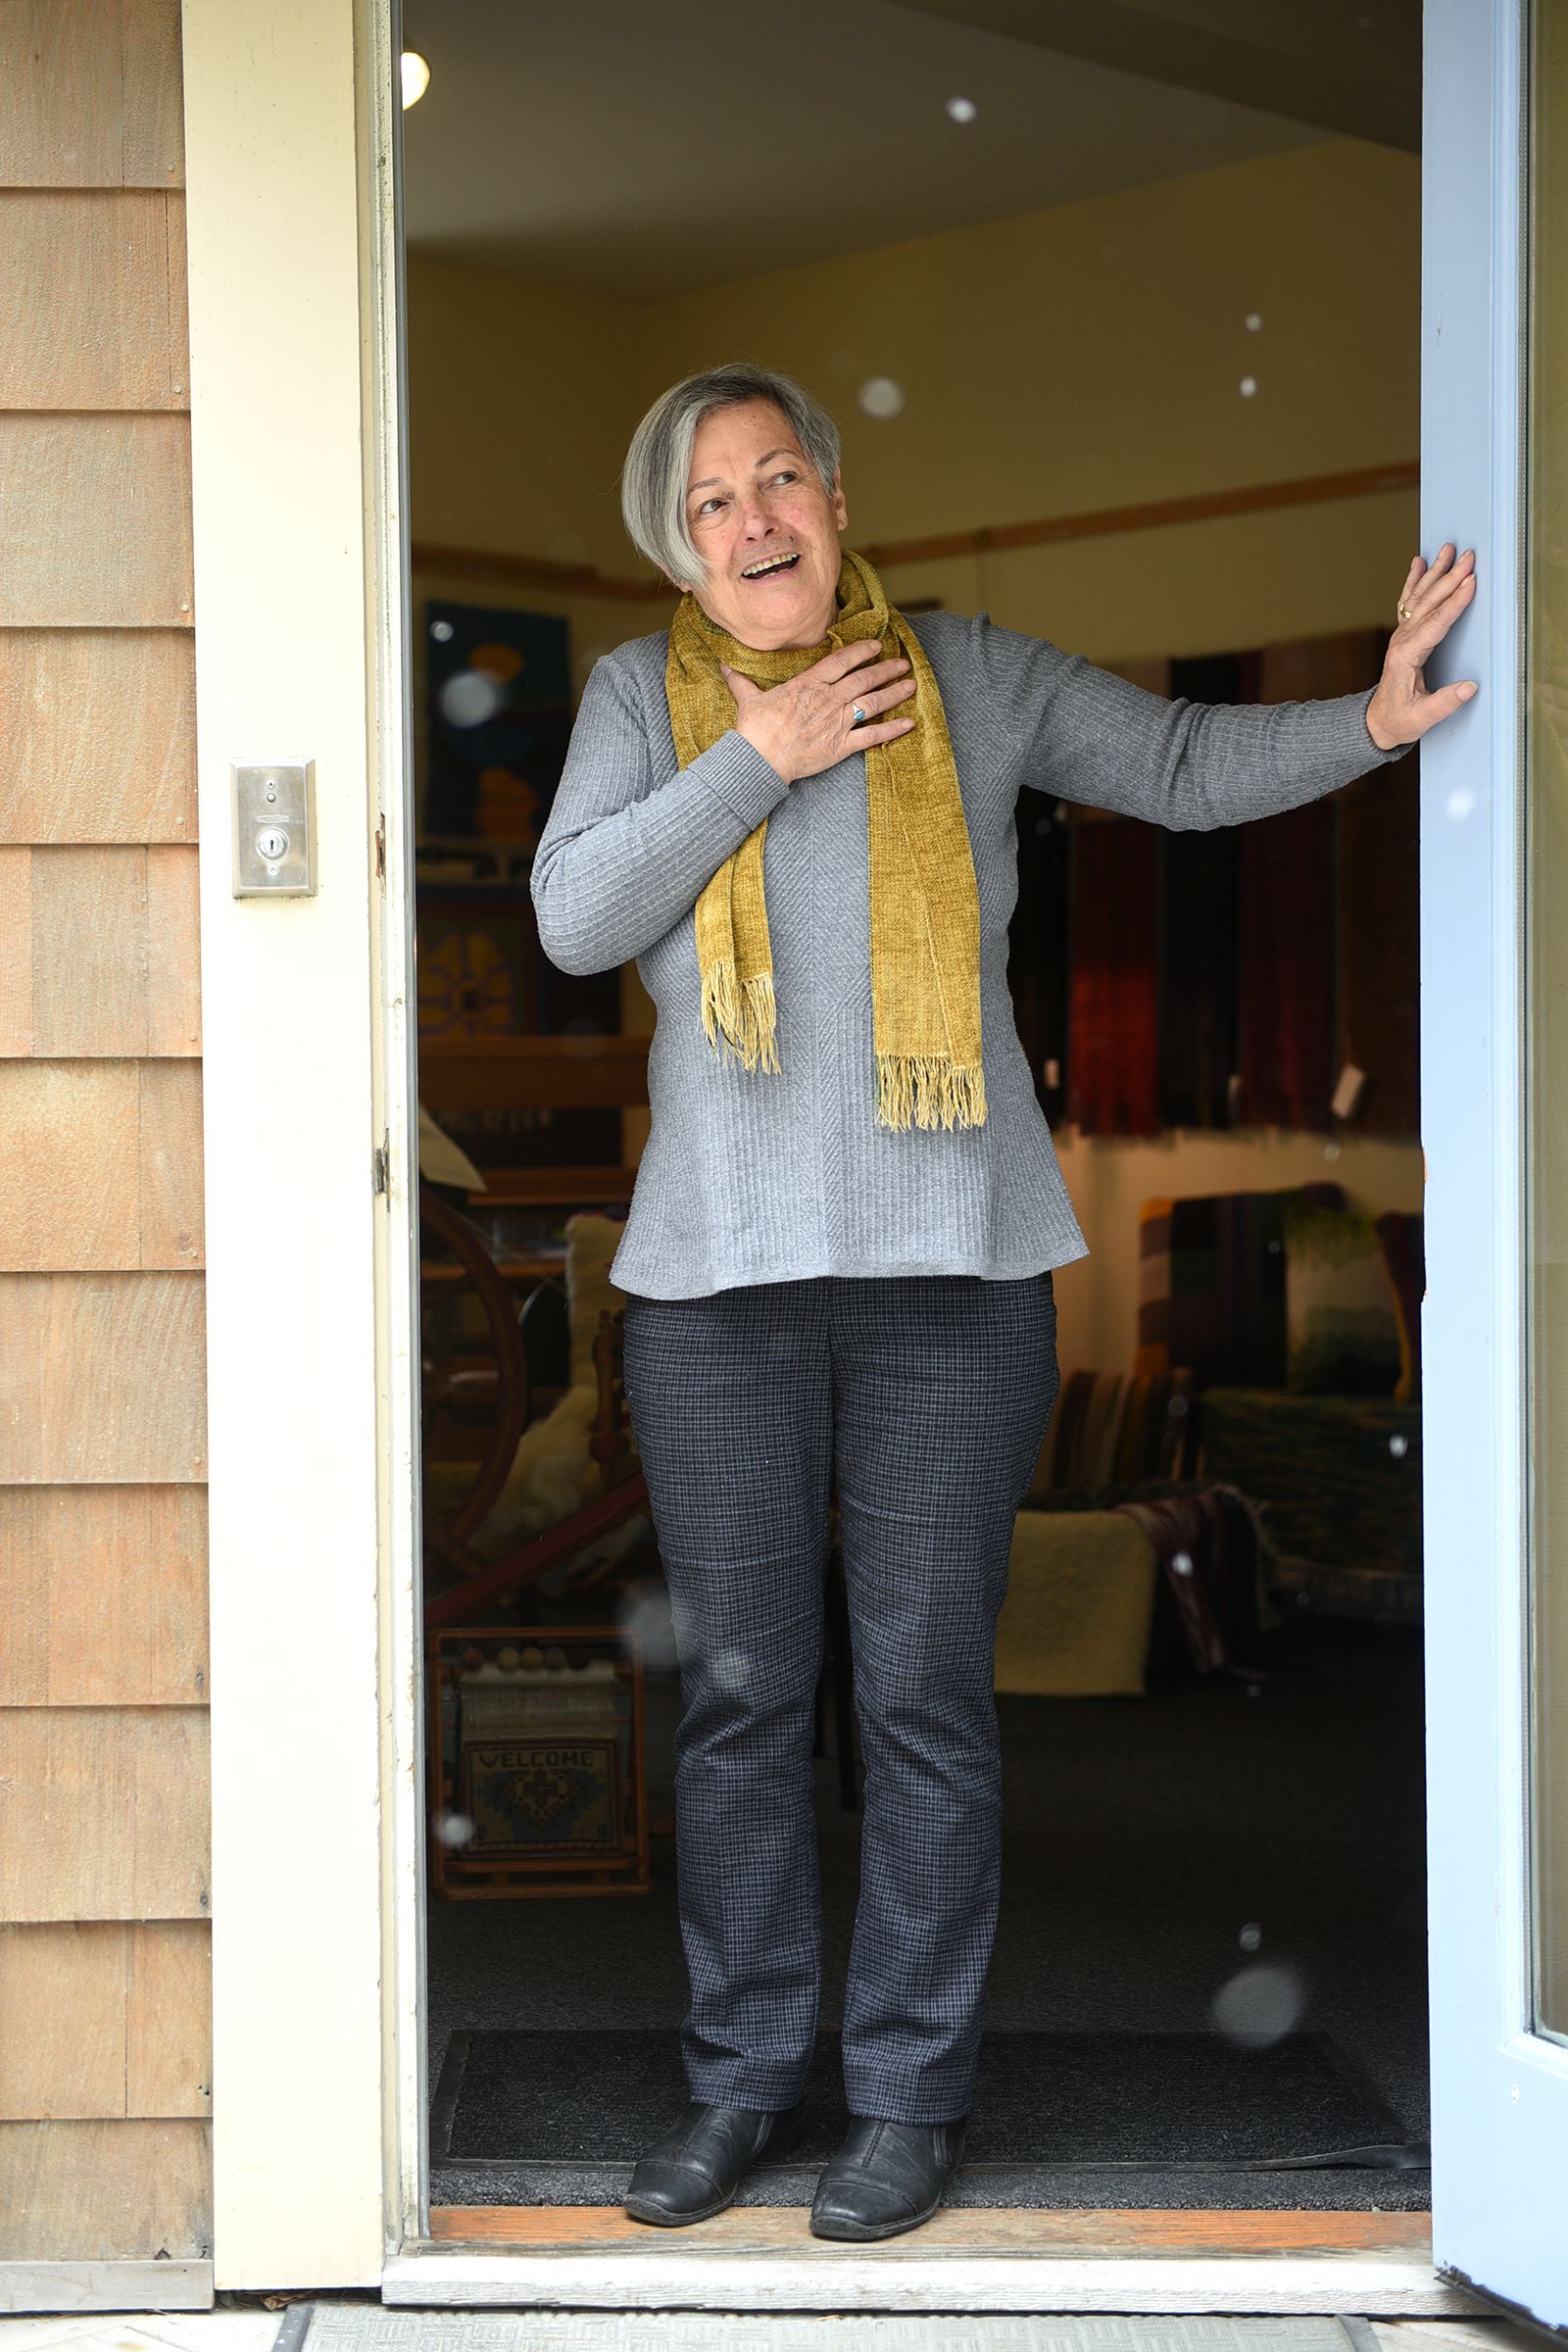 Vassie Sinopoulos uses recycled fabric in her work at her studio in Woodstock, Vt., on April 2, 2021. ( Valley News - Jennifer Hauck) Copyright Valley News. May not be reprinted or used online without permission. Send requests to permission@vnews.com.